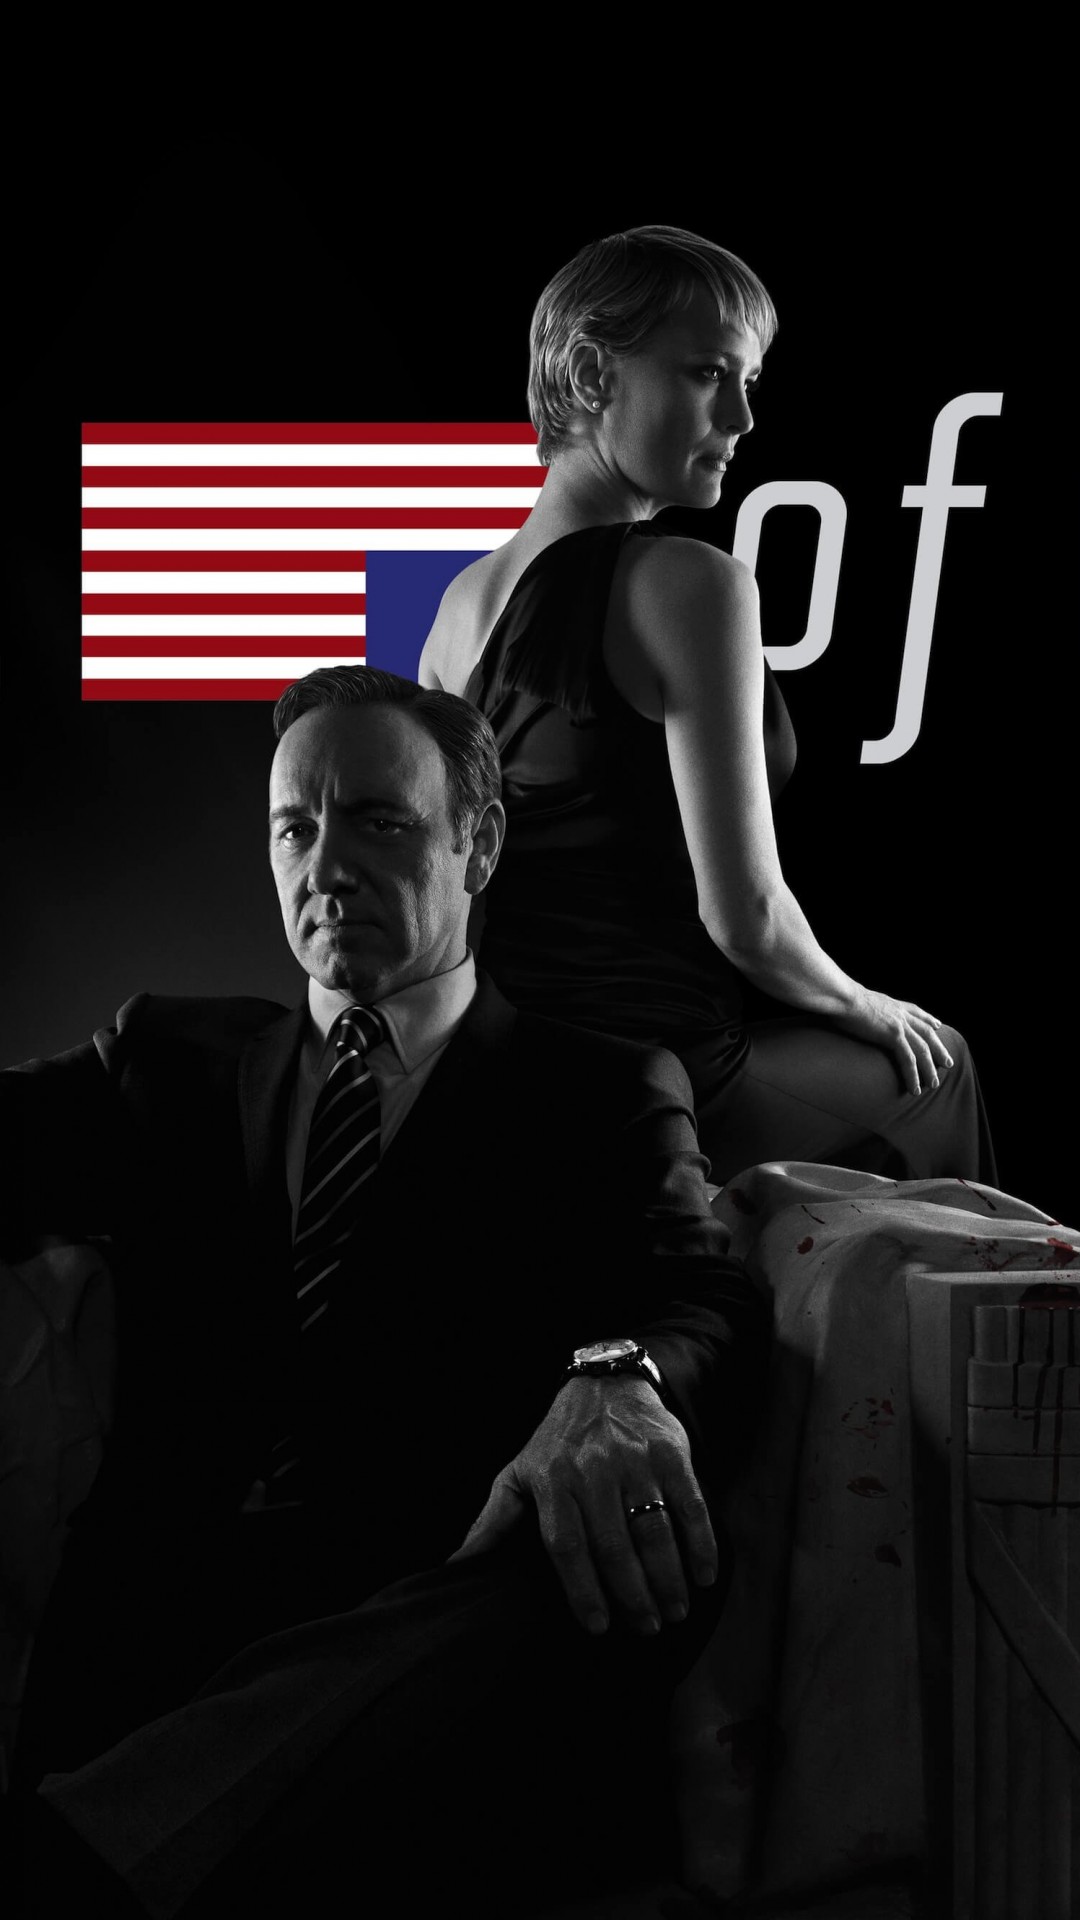 House of Cards - Black & White Wallpaper for SONY Xperia Z1